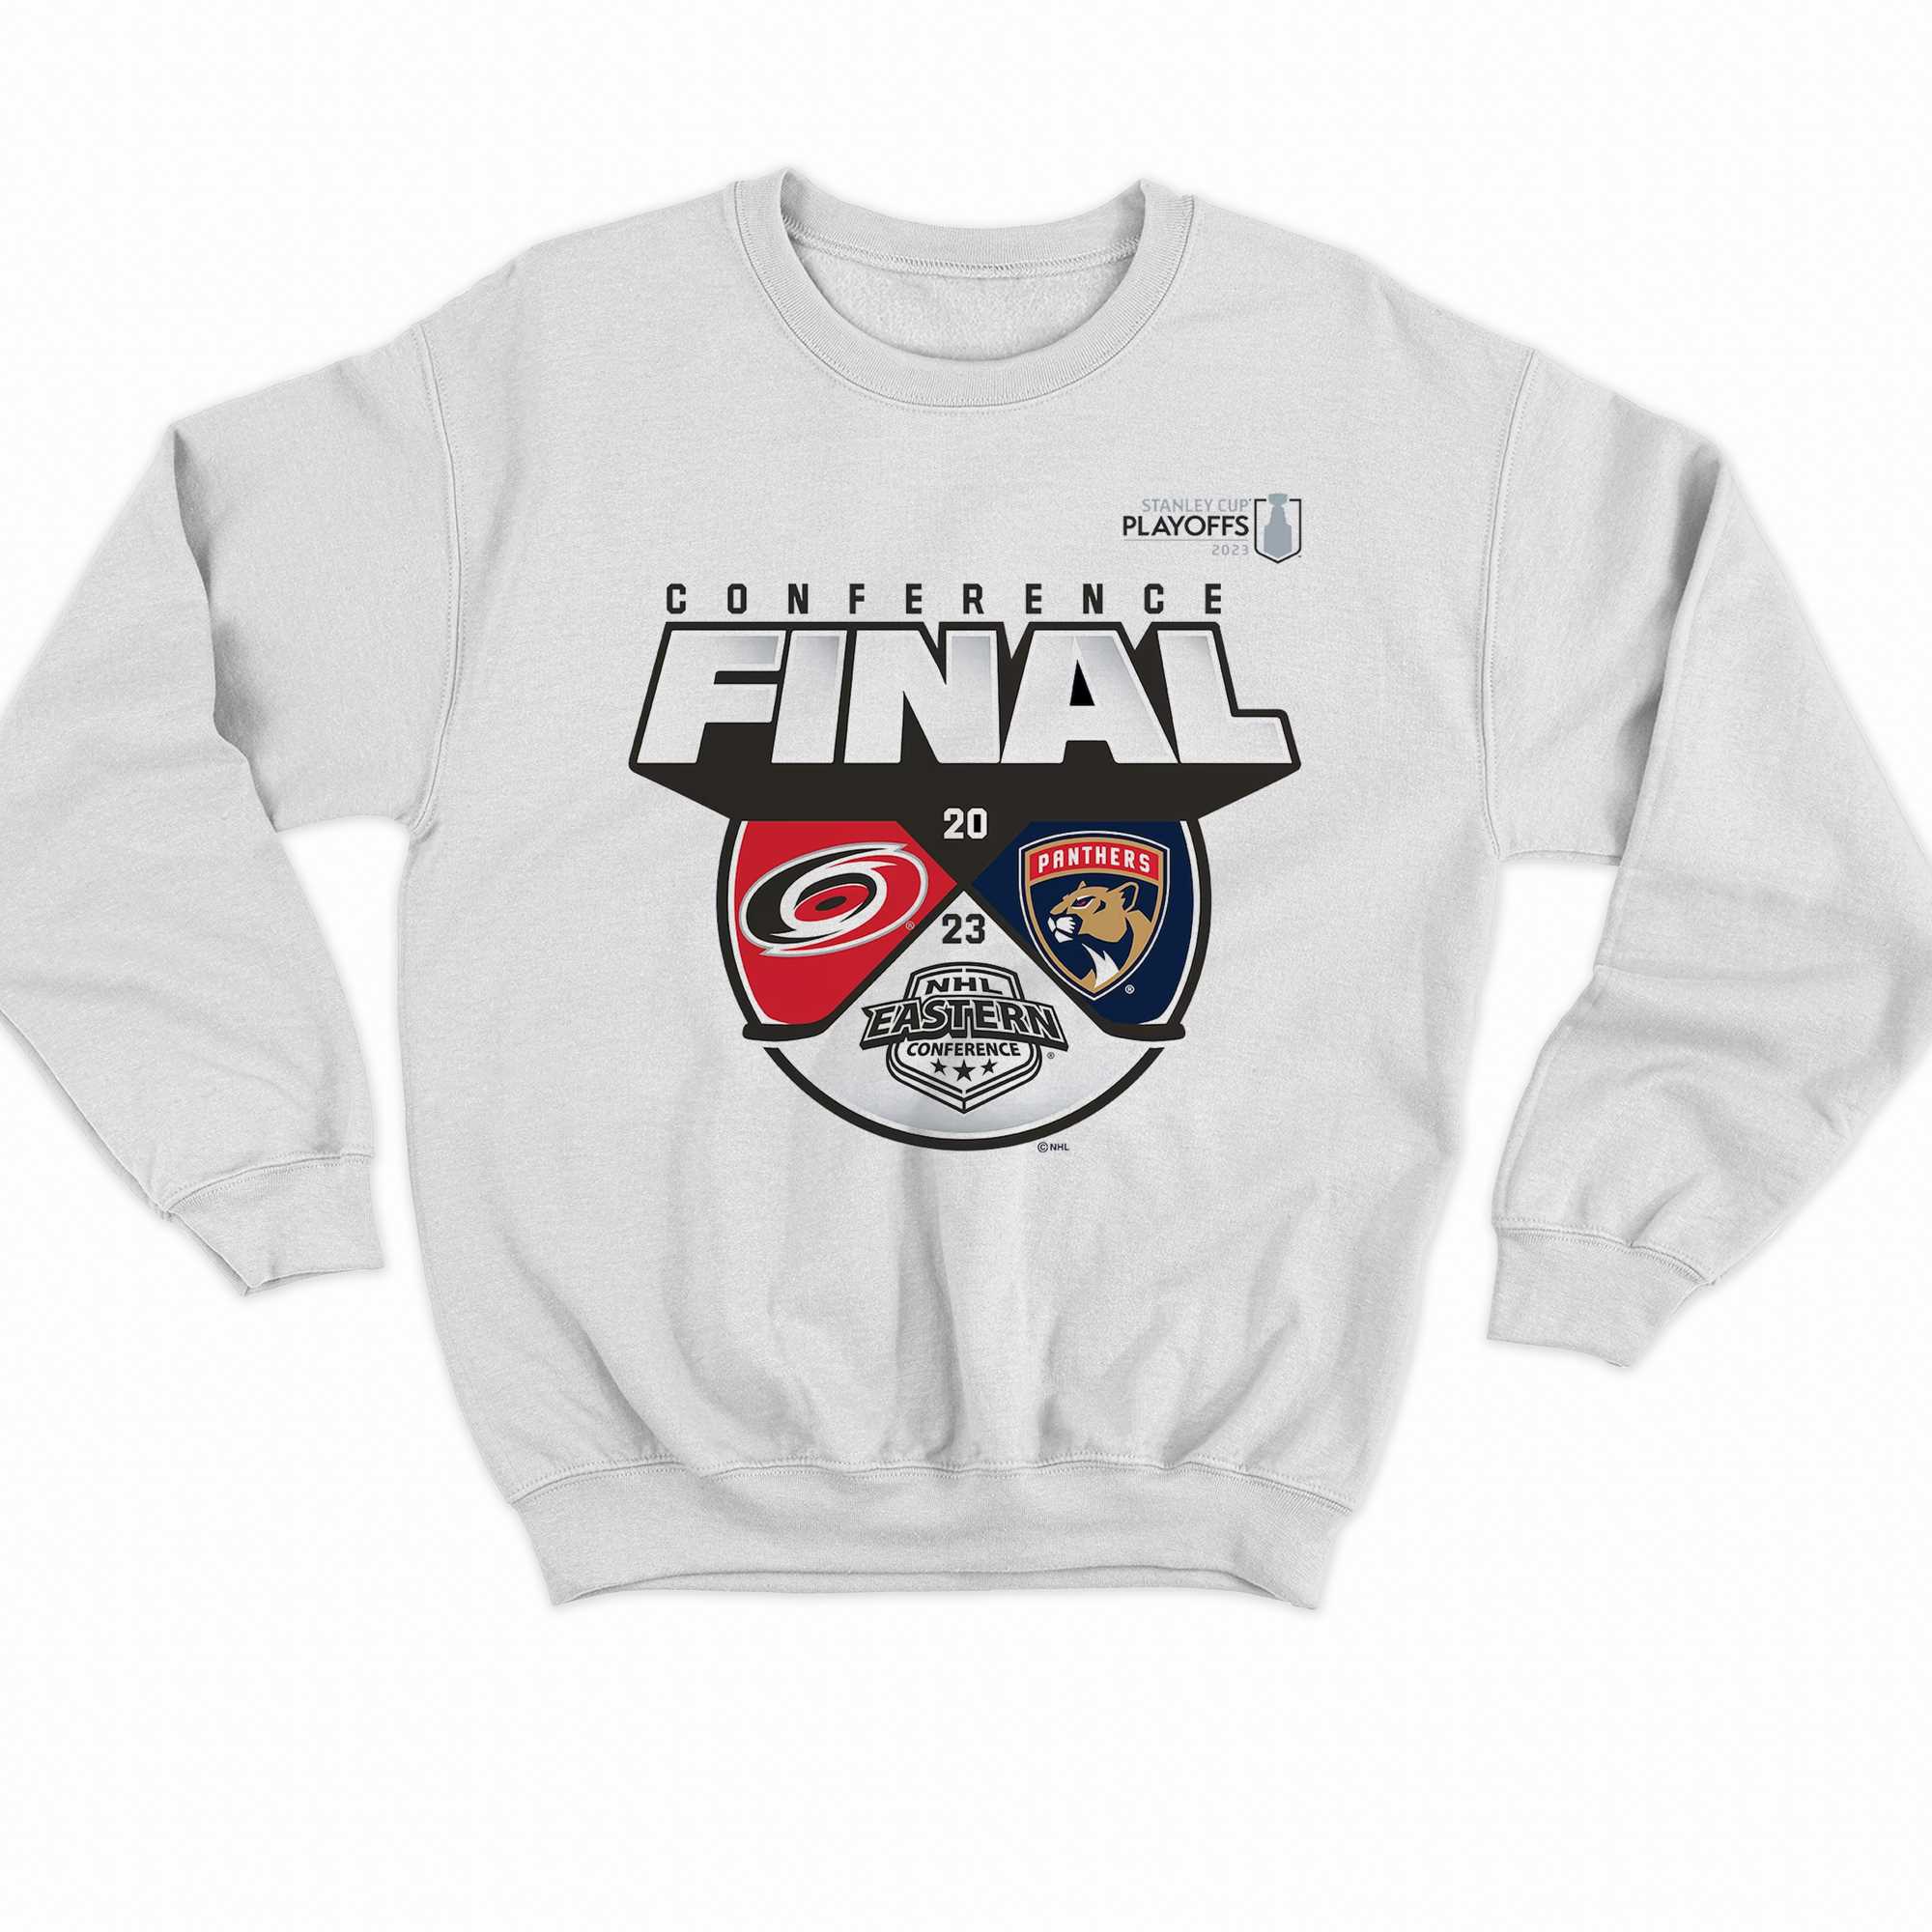 Official Stanley Cup Final 2023 Florida Panthers shirt, hoodie